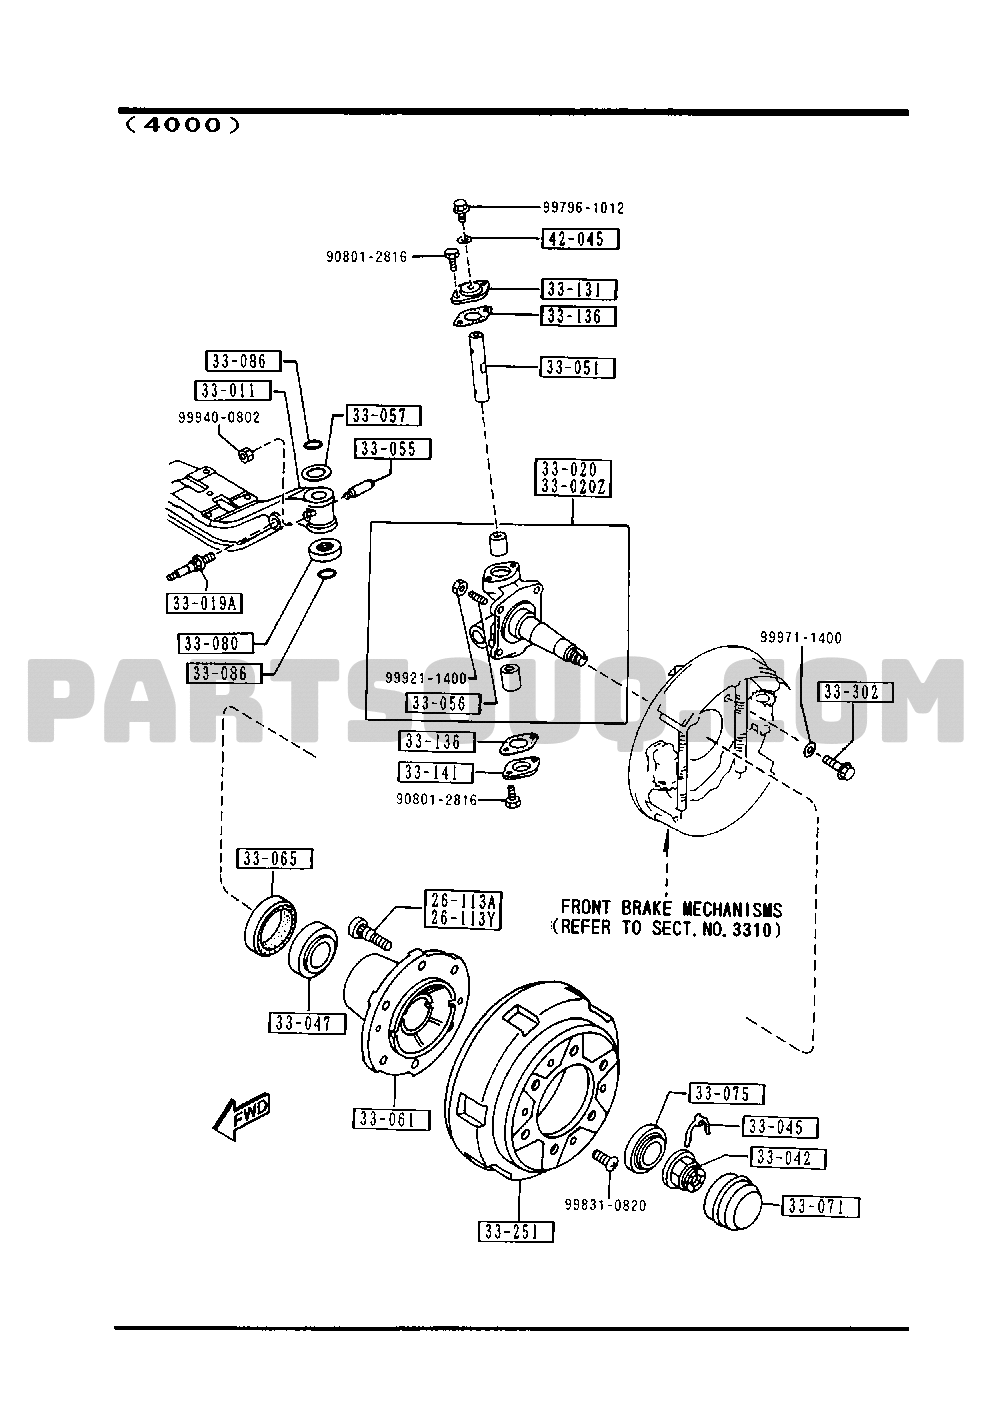 FRONT AXLE (DUAL TIRE) [02/02]